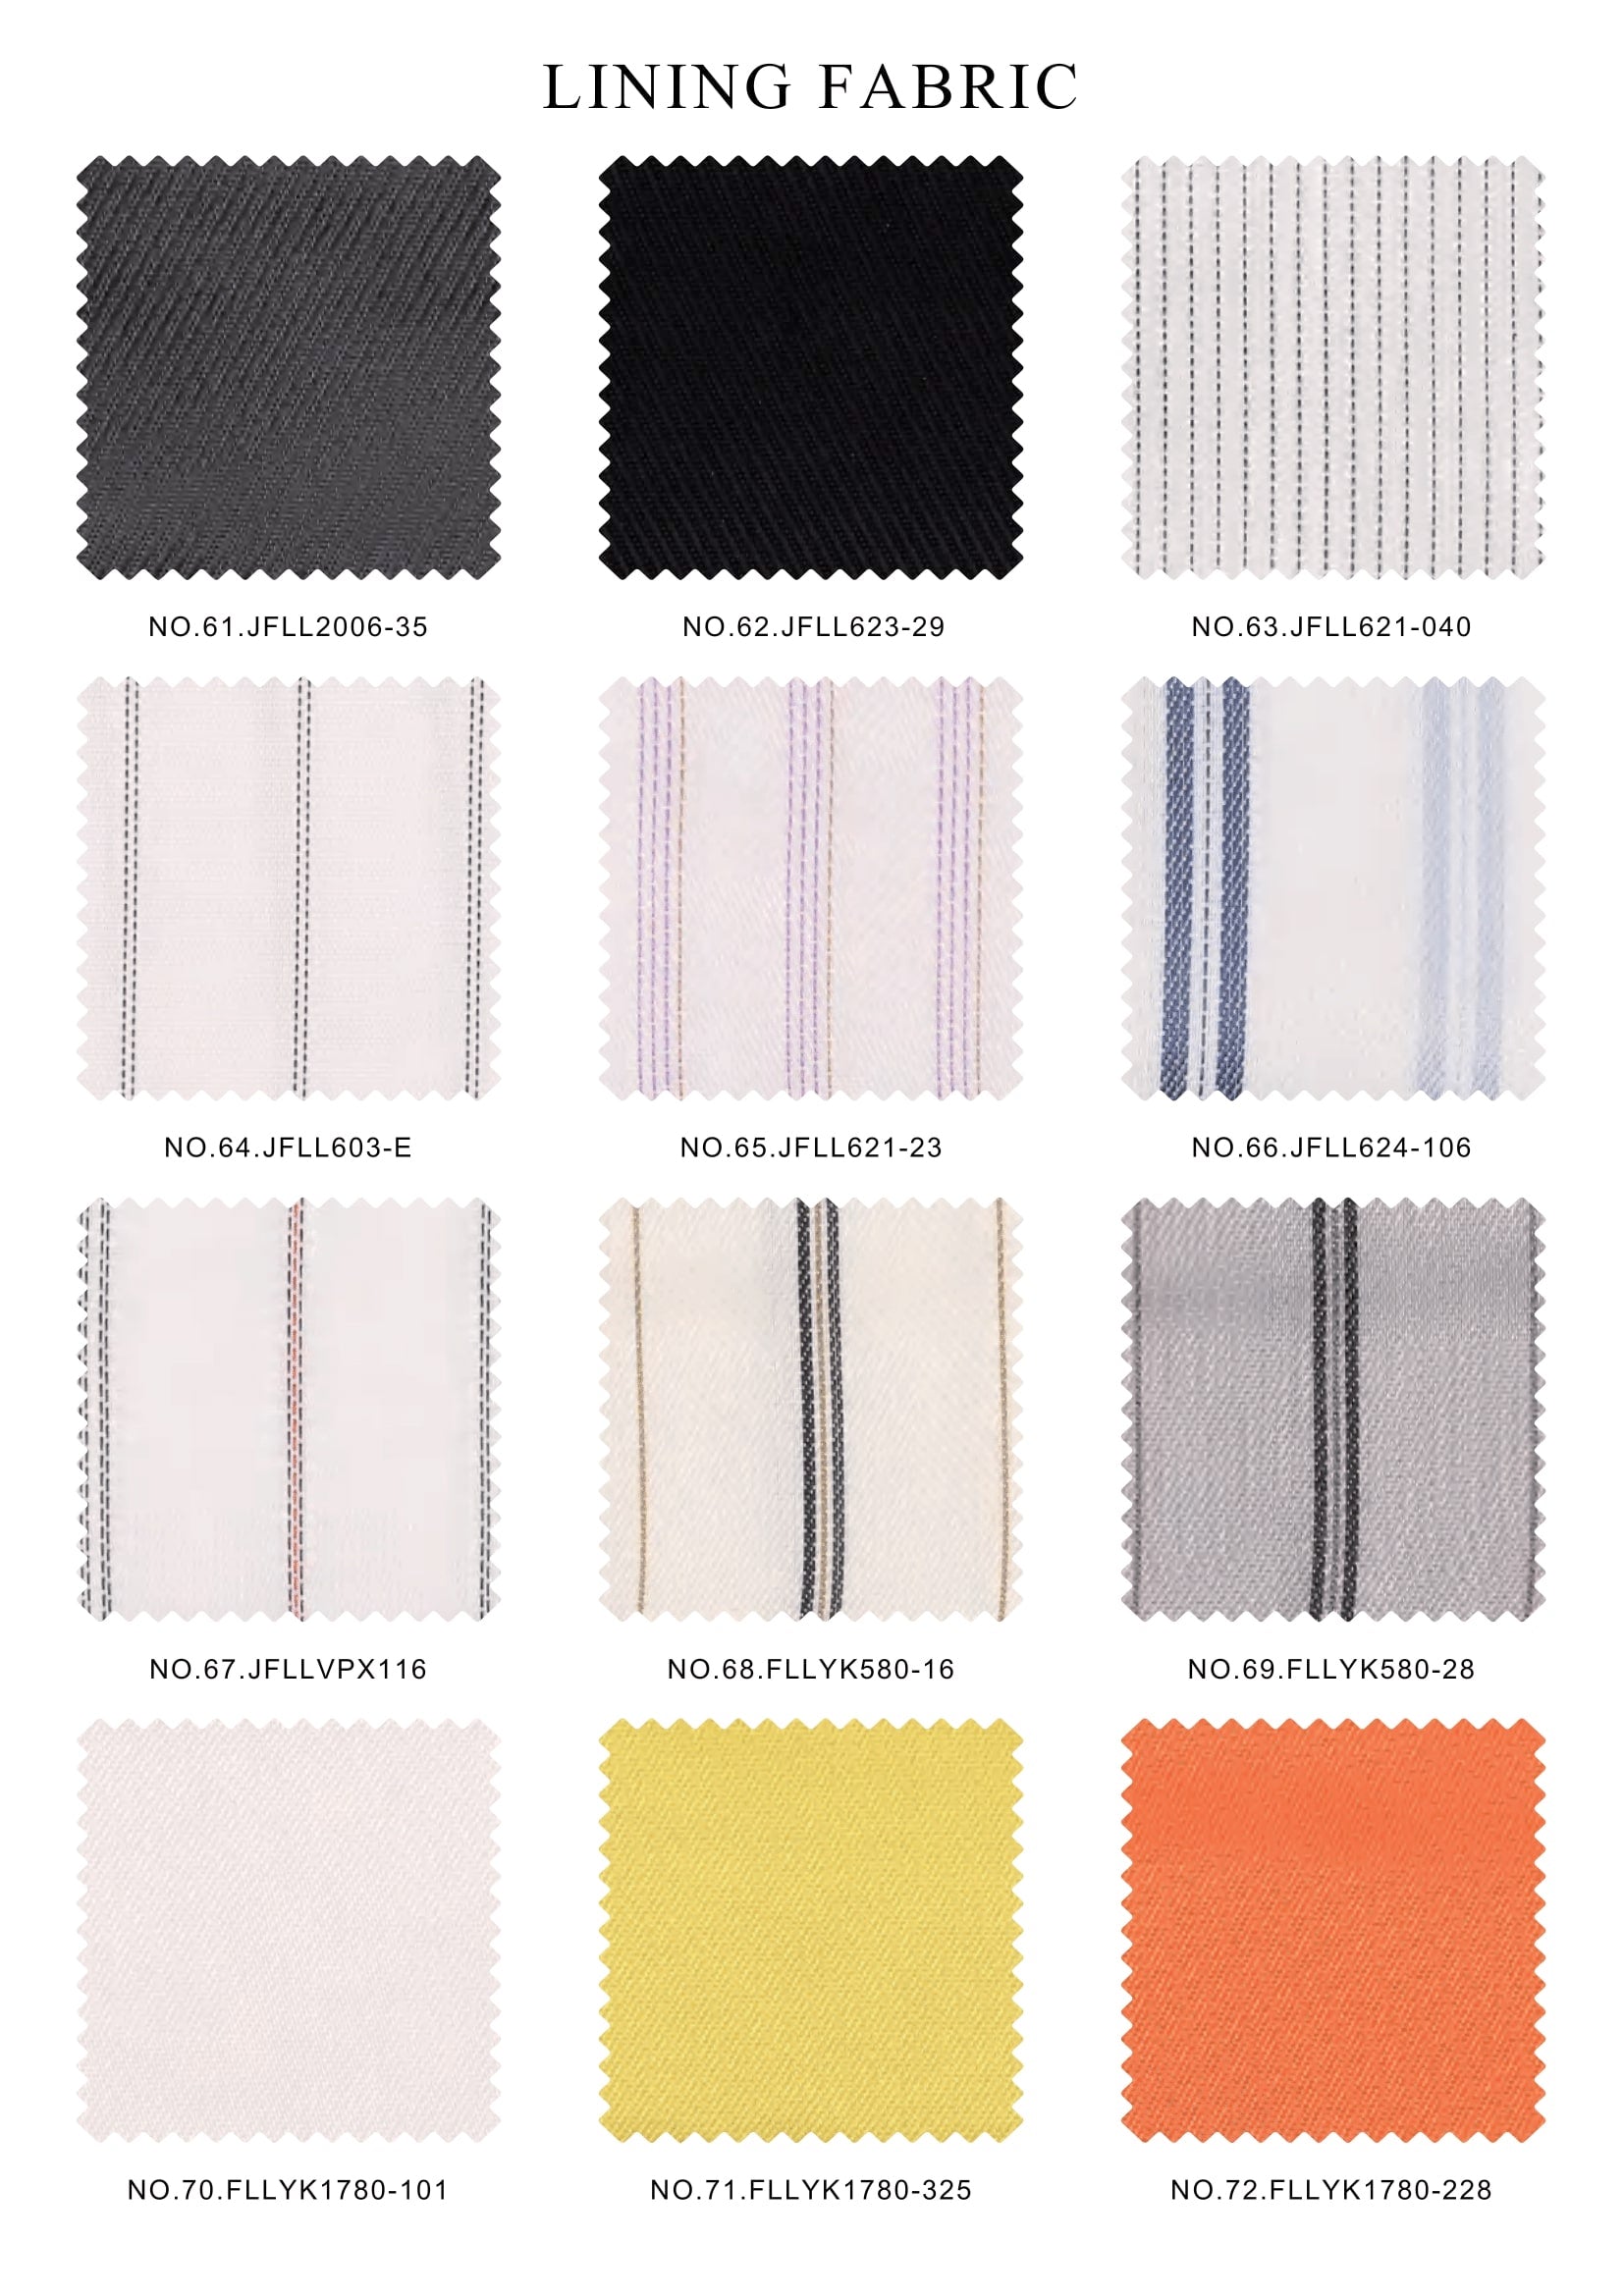 Stretch Woven Fabric Options for the Sasha Trousers | Closet Core Patterns